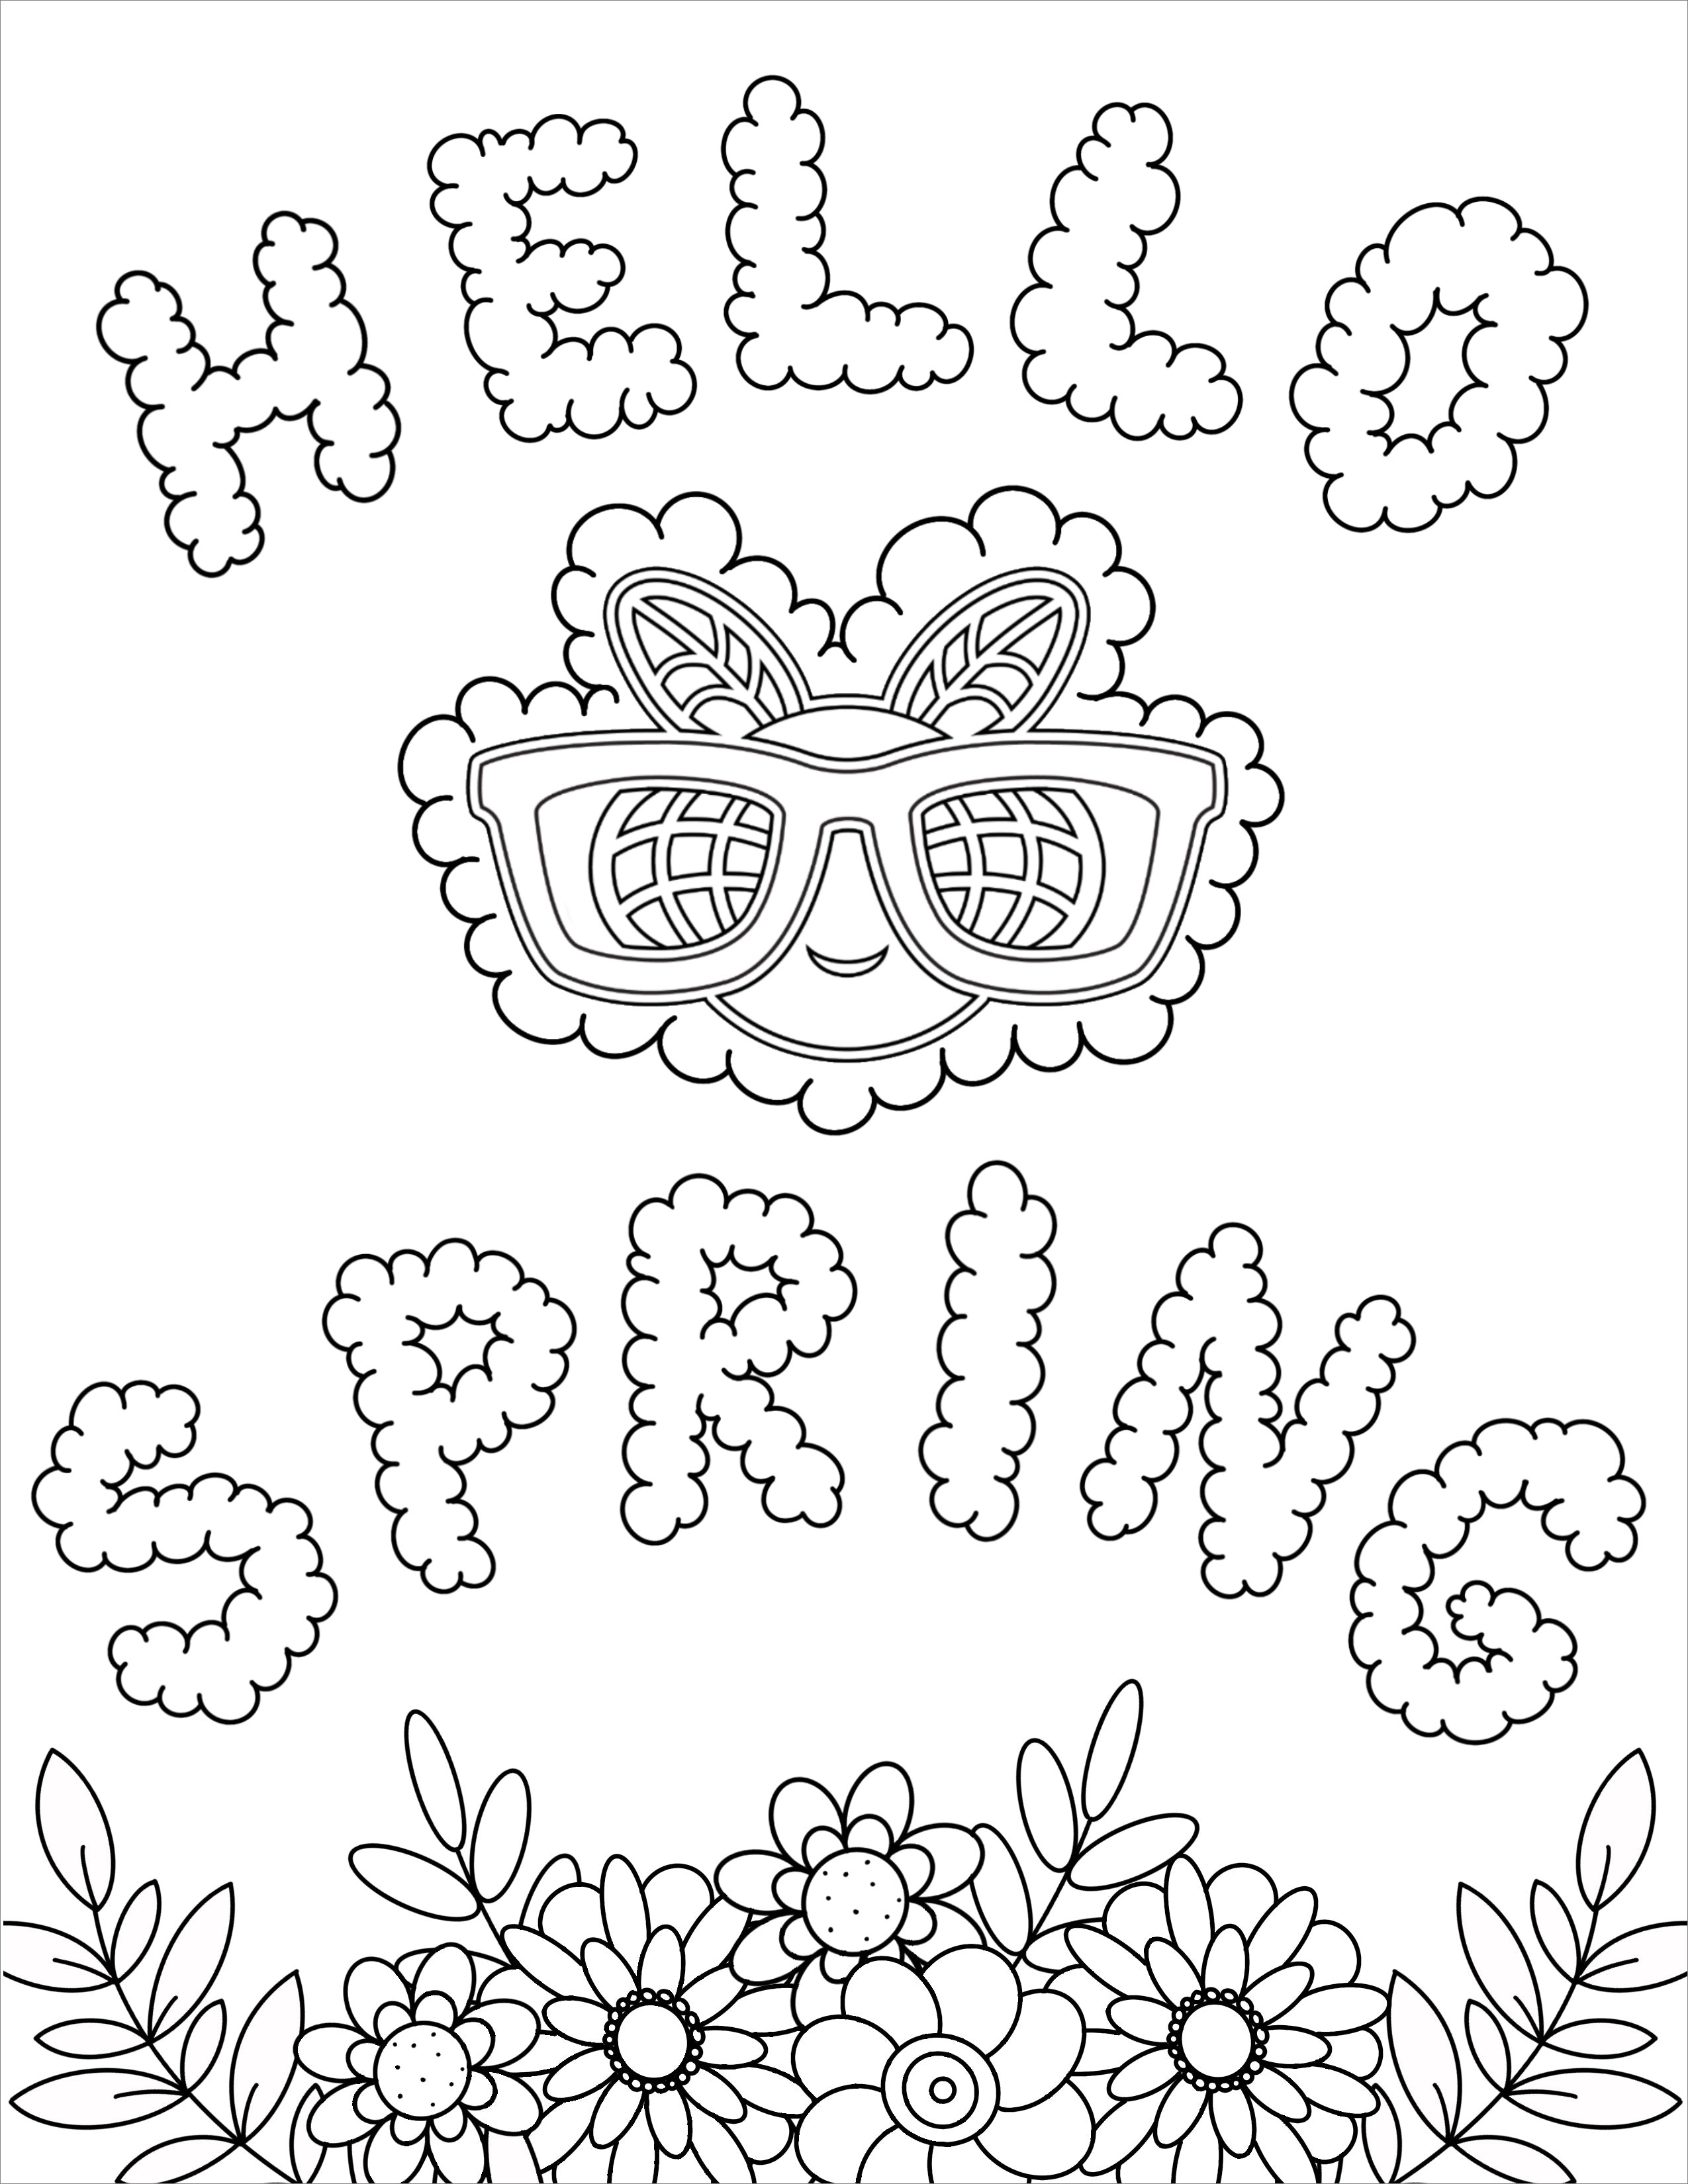 culture coloring pages